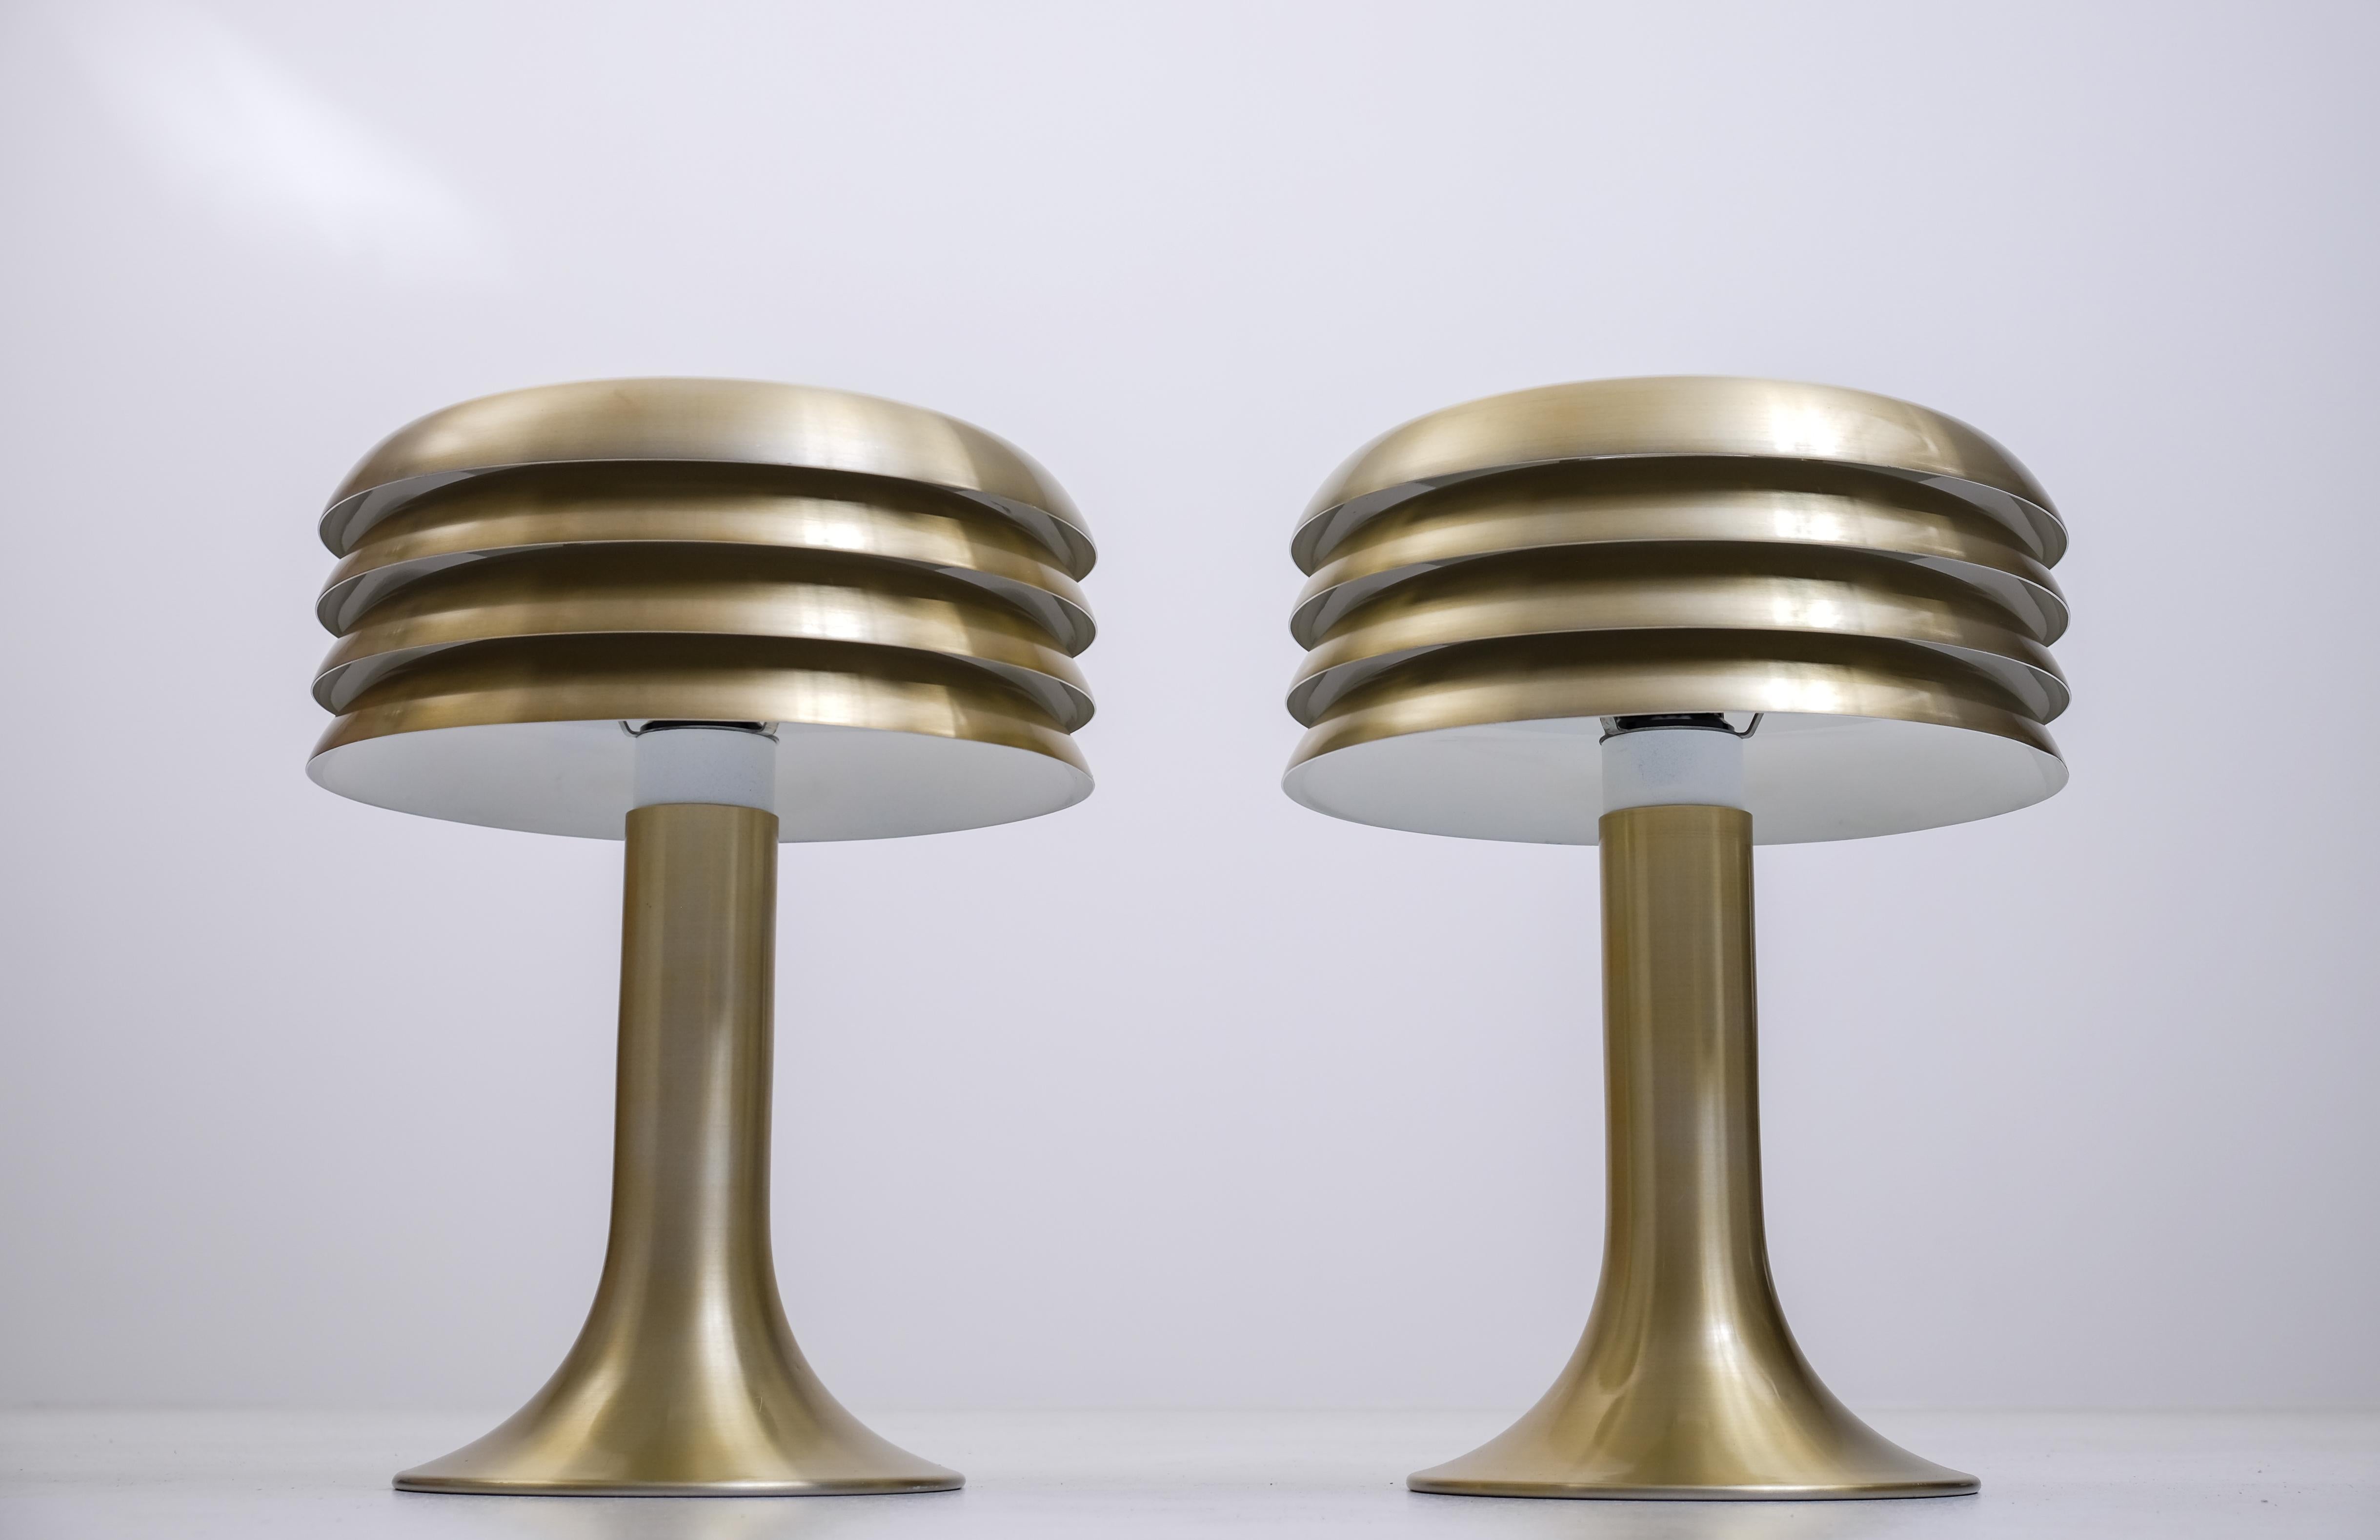 Pair of Hans-Agne Jakobsson Table Lamps BN-26, 1960s For Sale 1